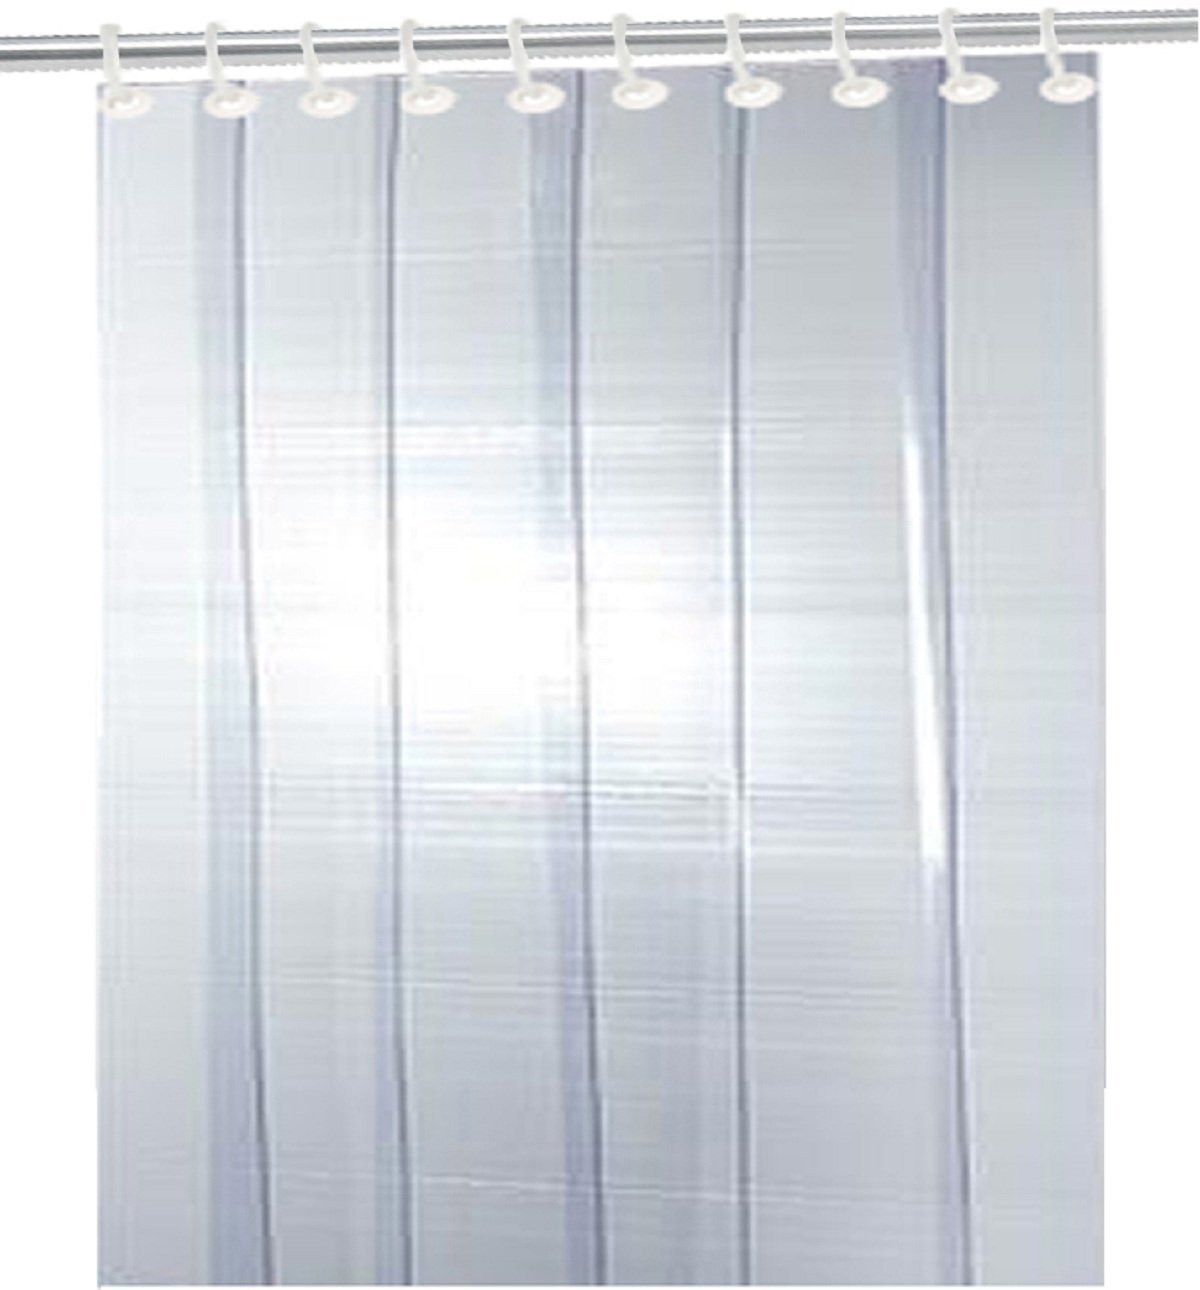 Kuber Industries .50MM Pack Of 2| Rings AC Curtain | PVC 6 Strips AC Curtain | Window Curtain for Bathroom | Curtains for Door | Waterproof Shower Curtain | 7 Feet| Transparent